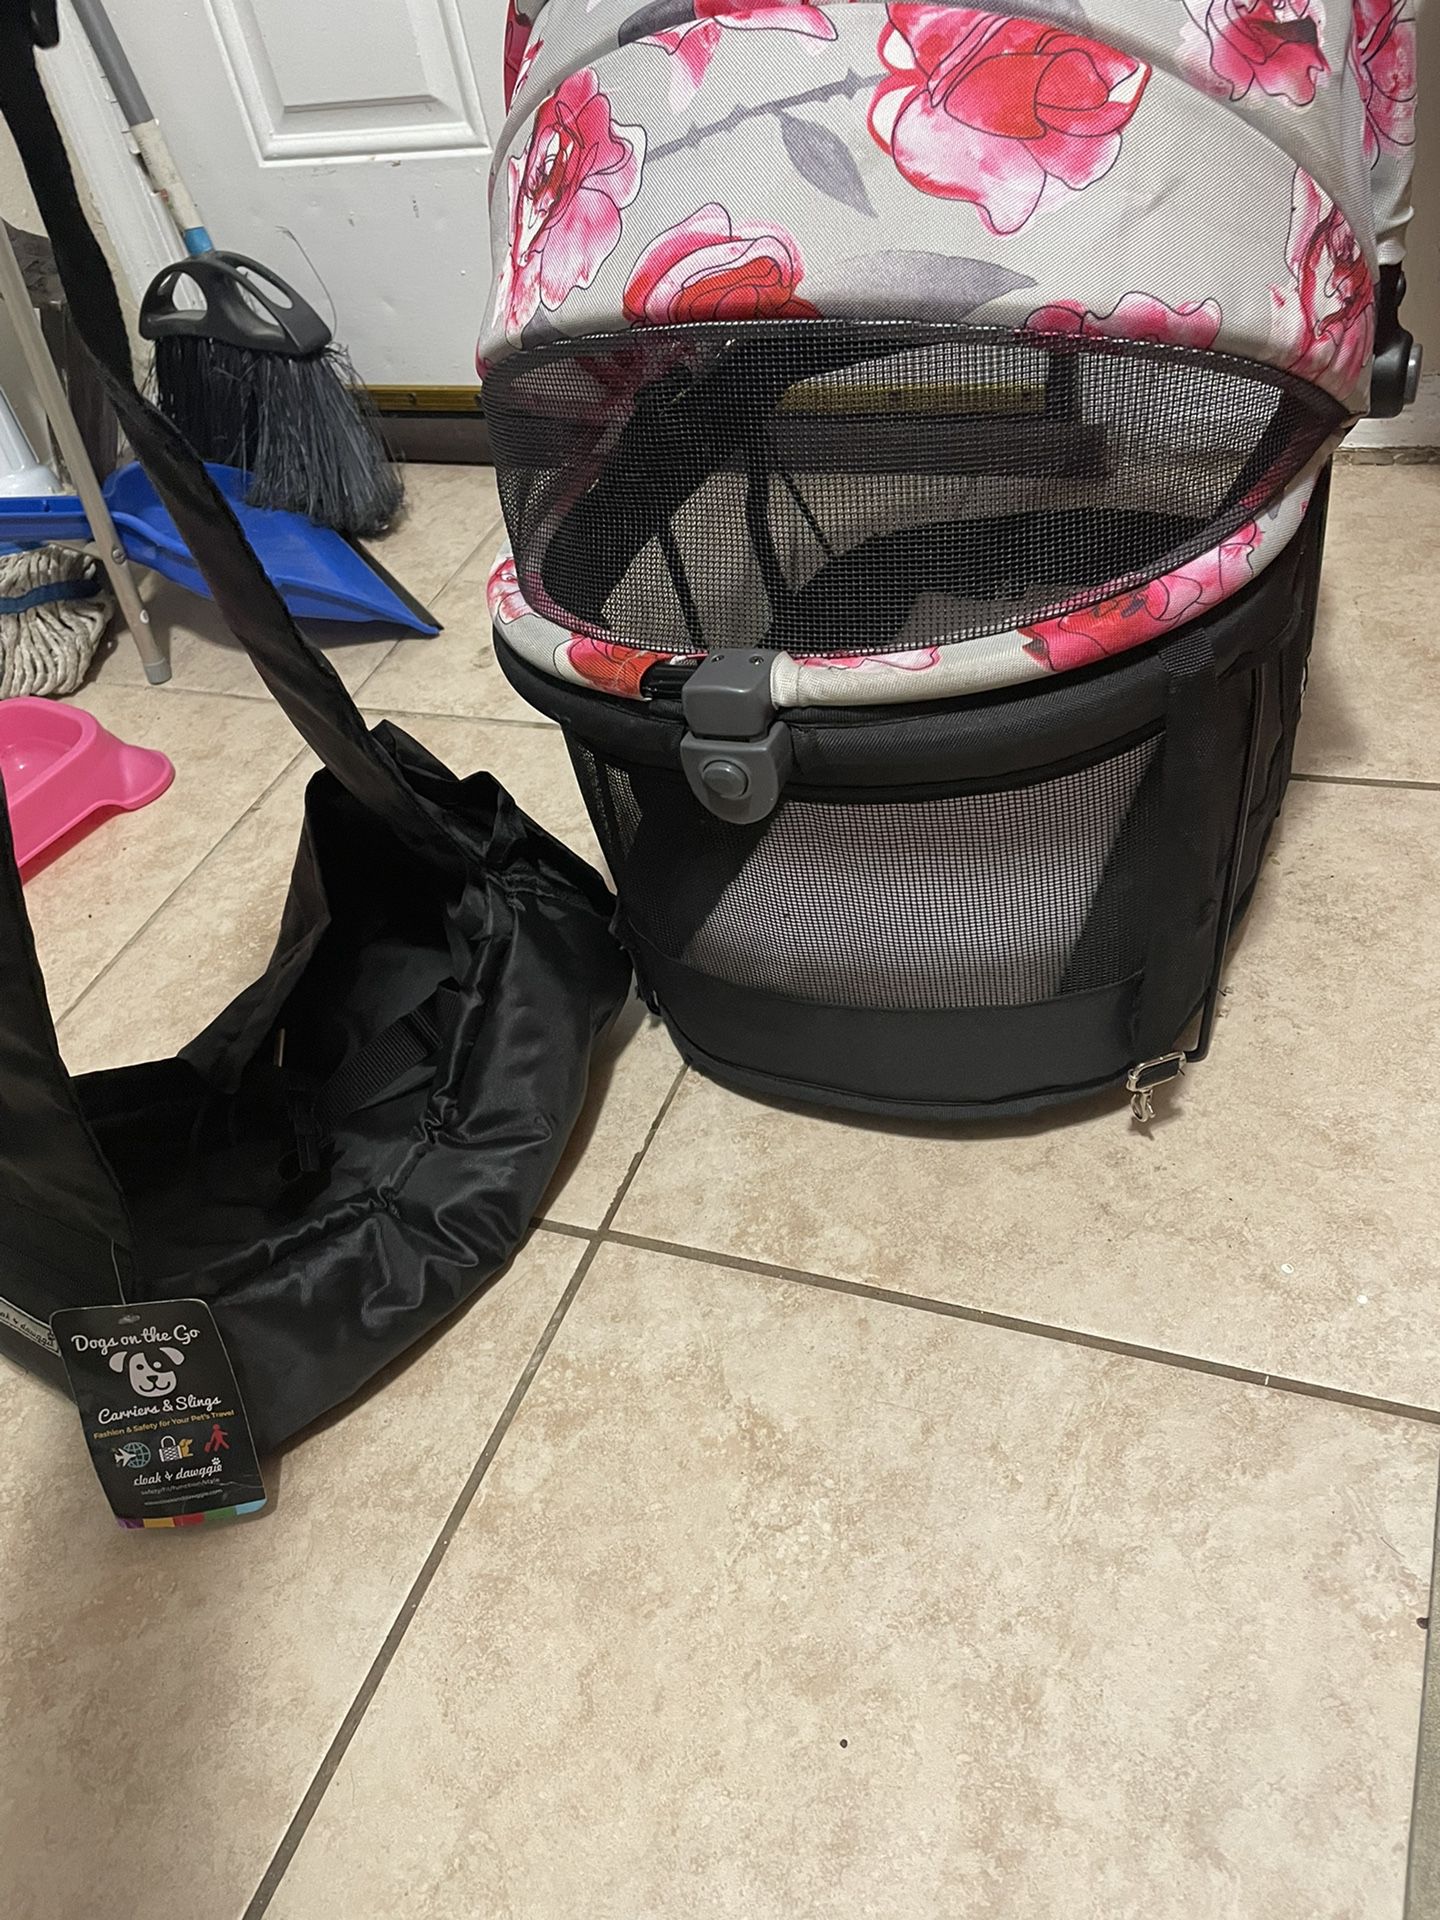 Dog Carseat Carrier And Bag Carrier Everything For 50.00 need gone today